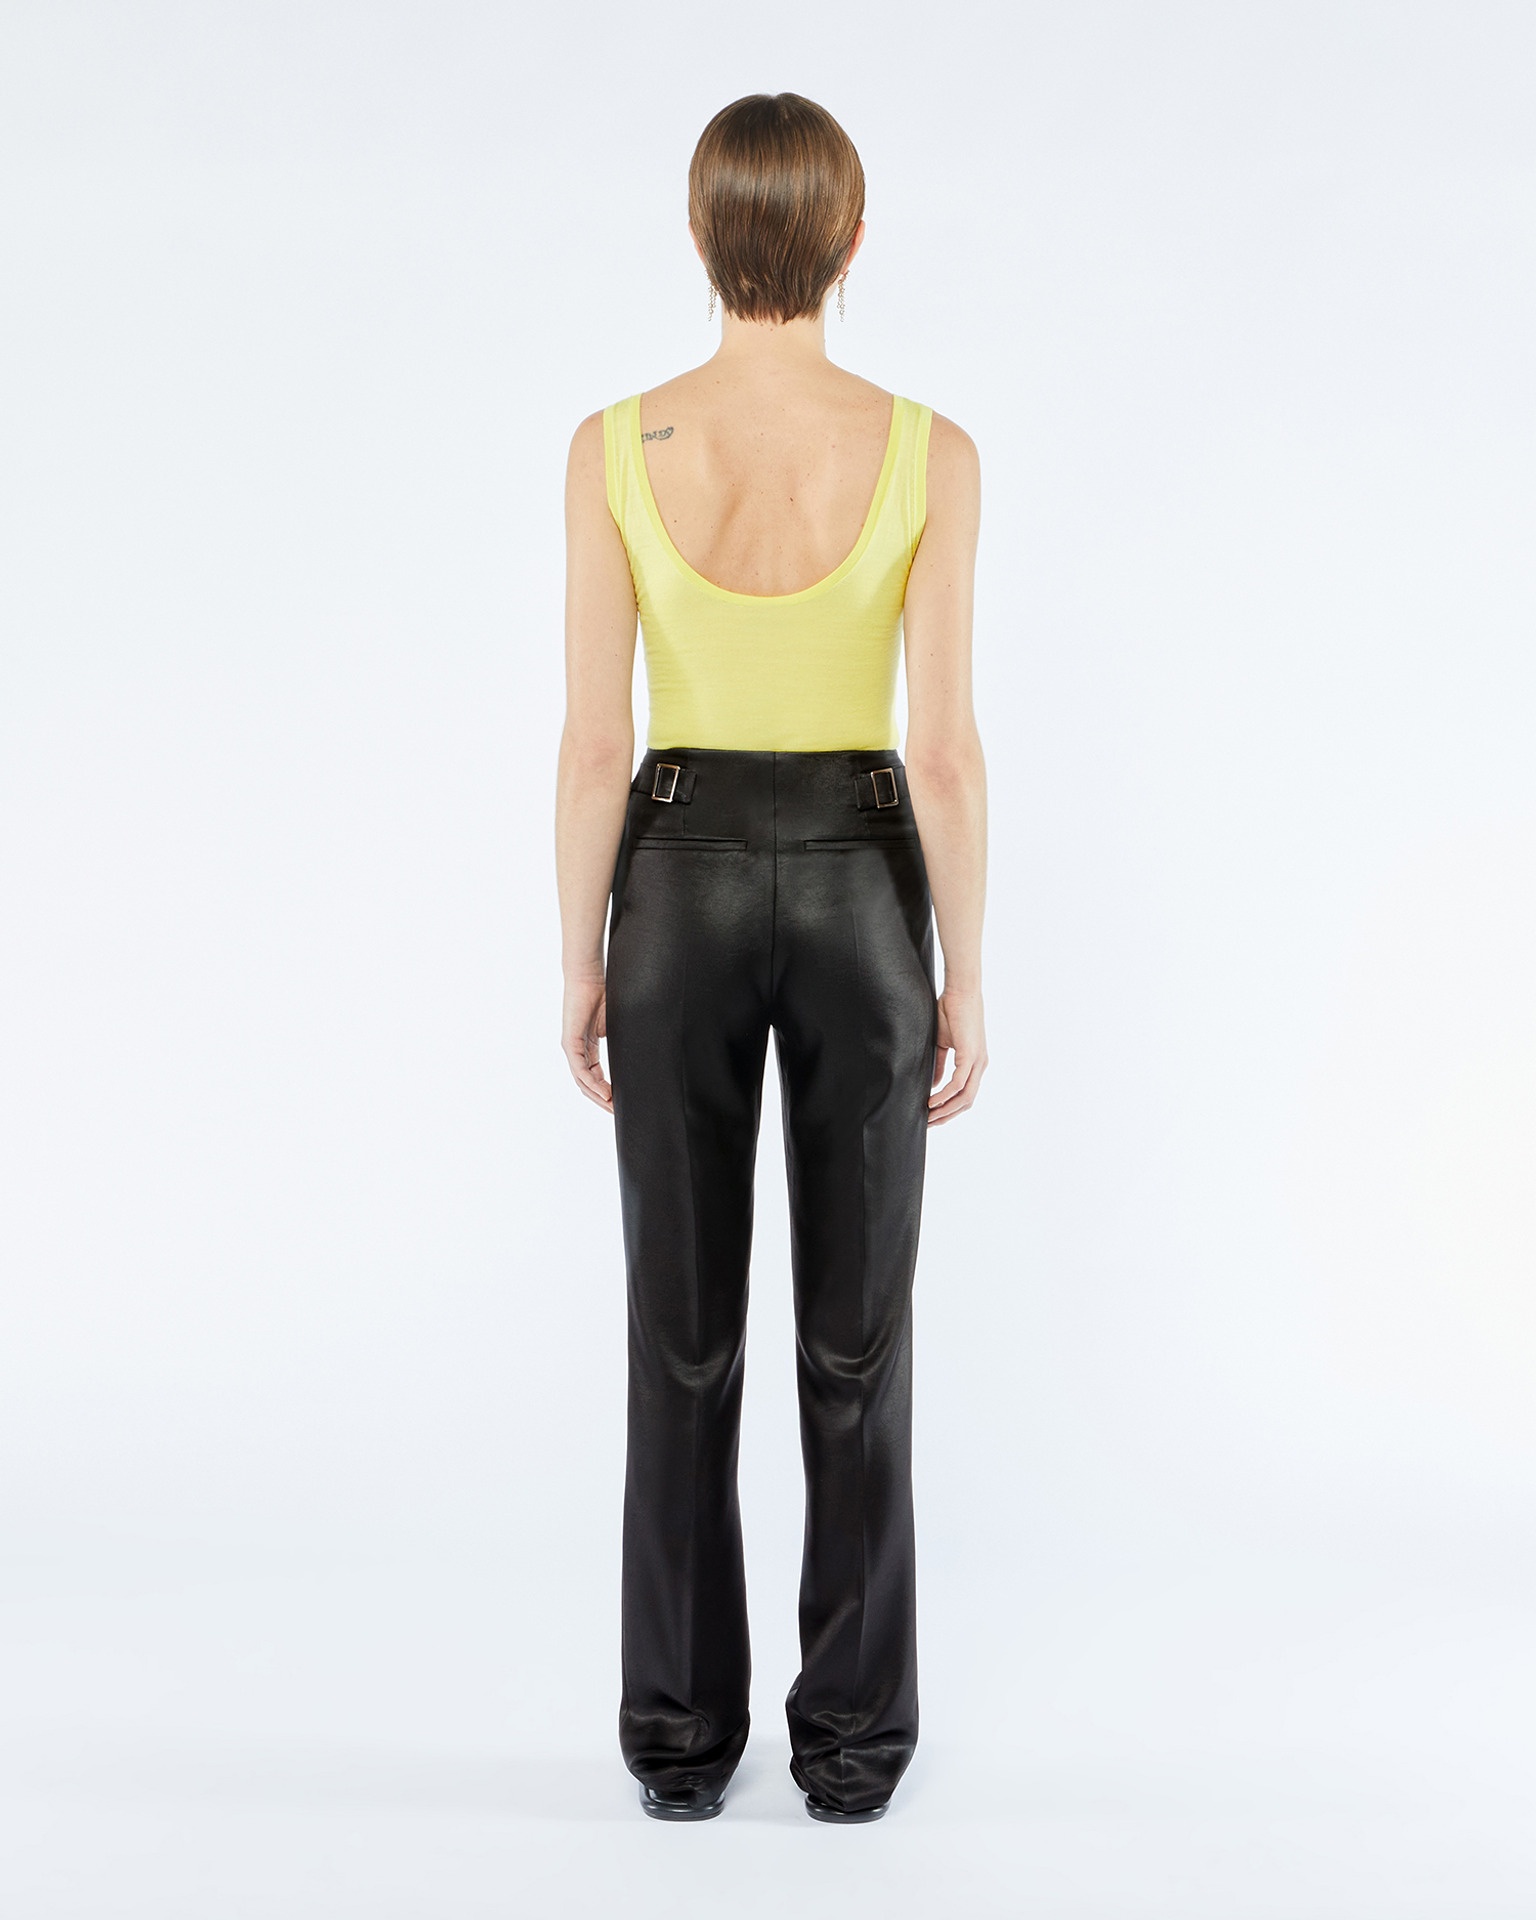 MAURIE - Tailored satin pants - Black - 4